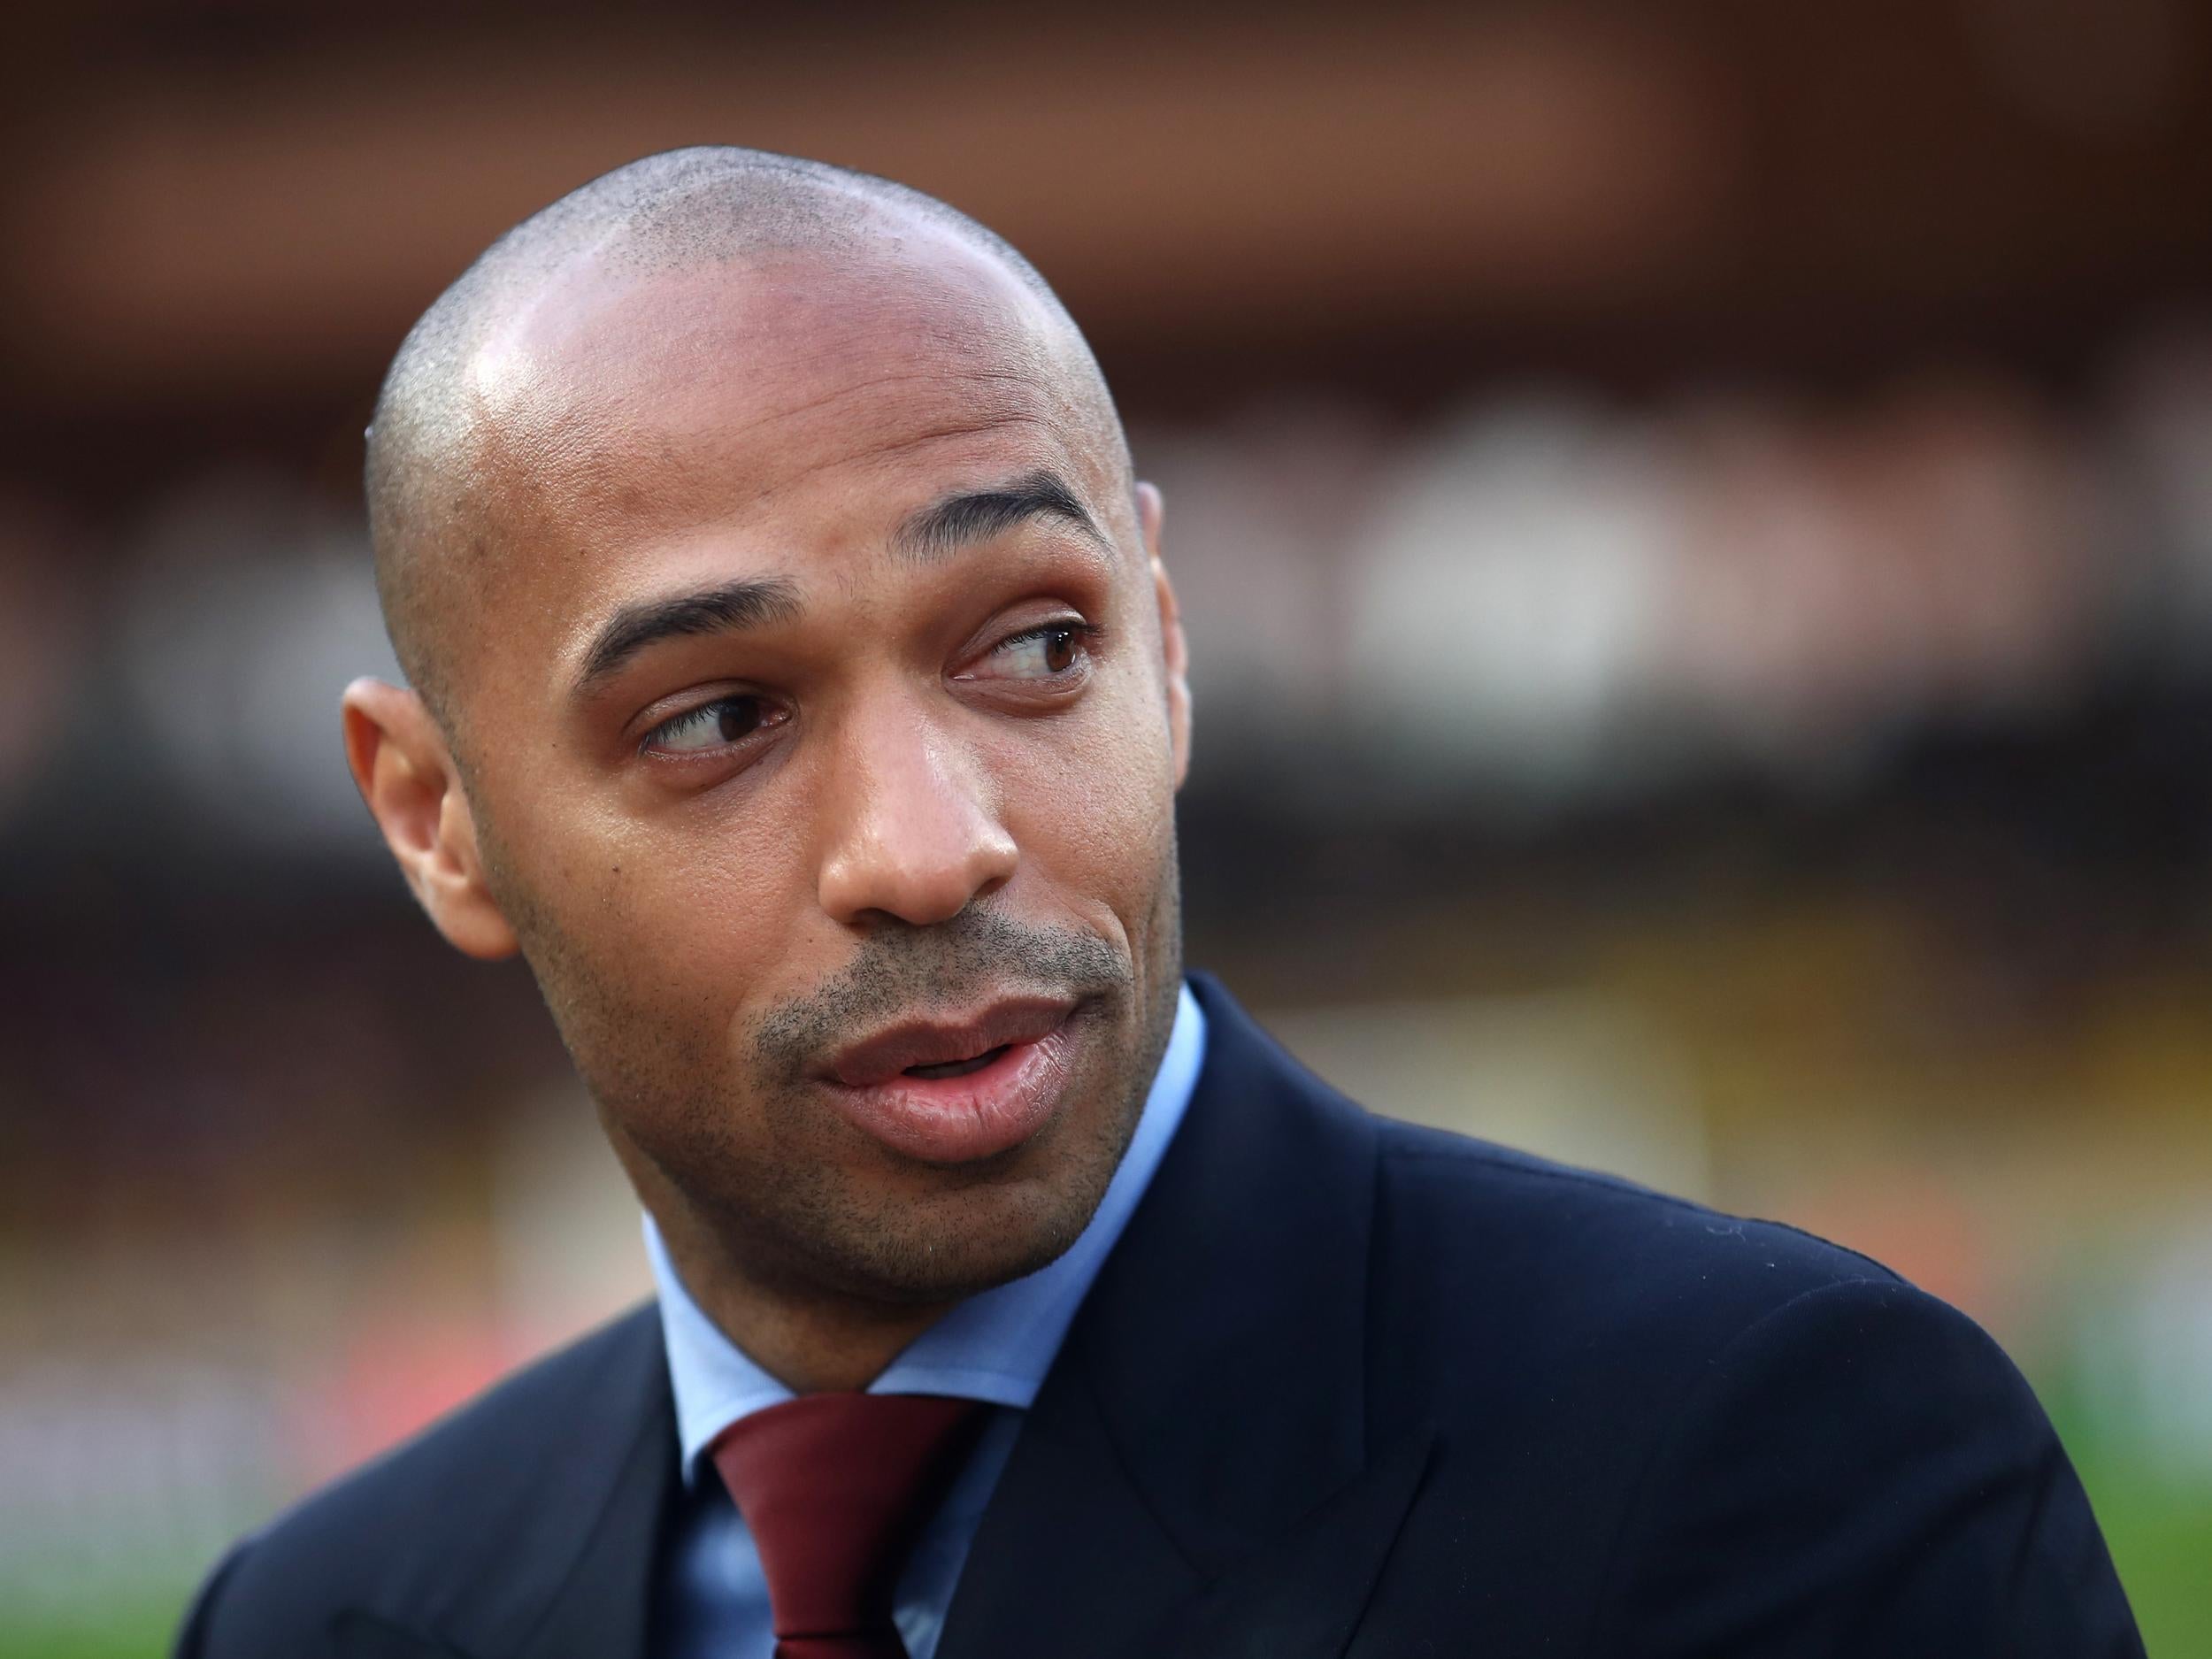 Arsenal supporters were furious with Henry